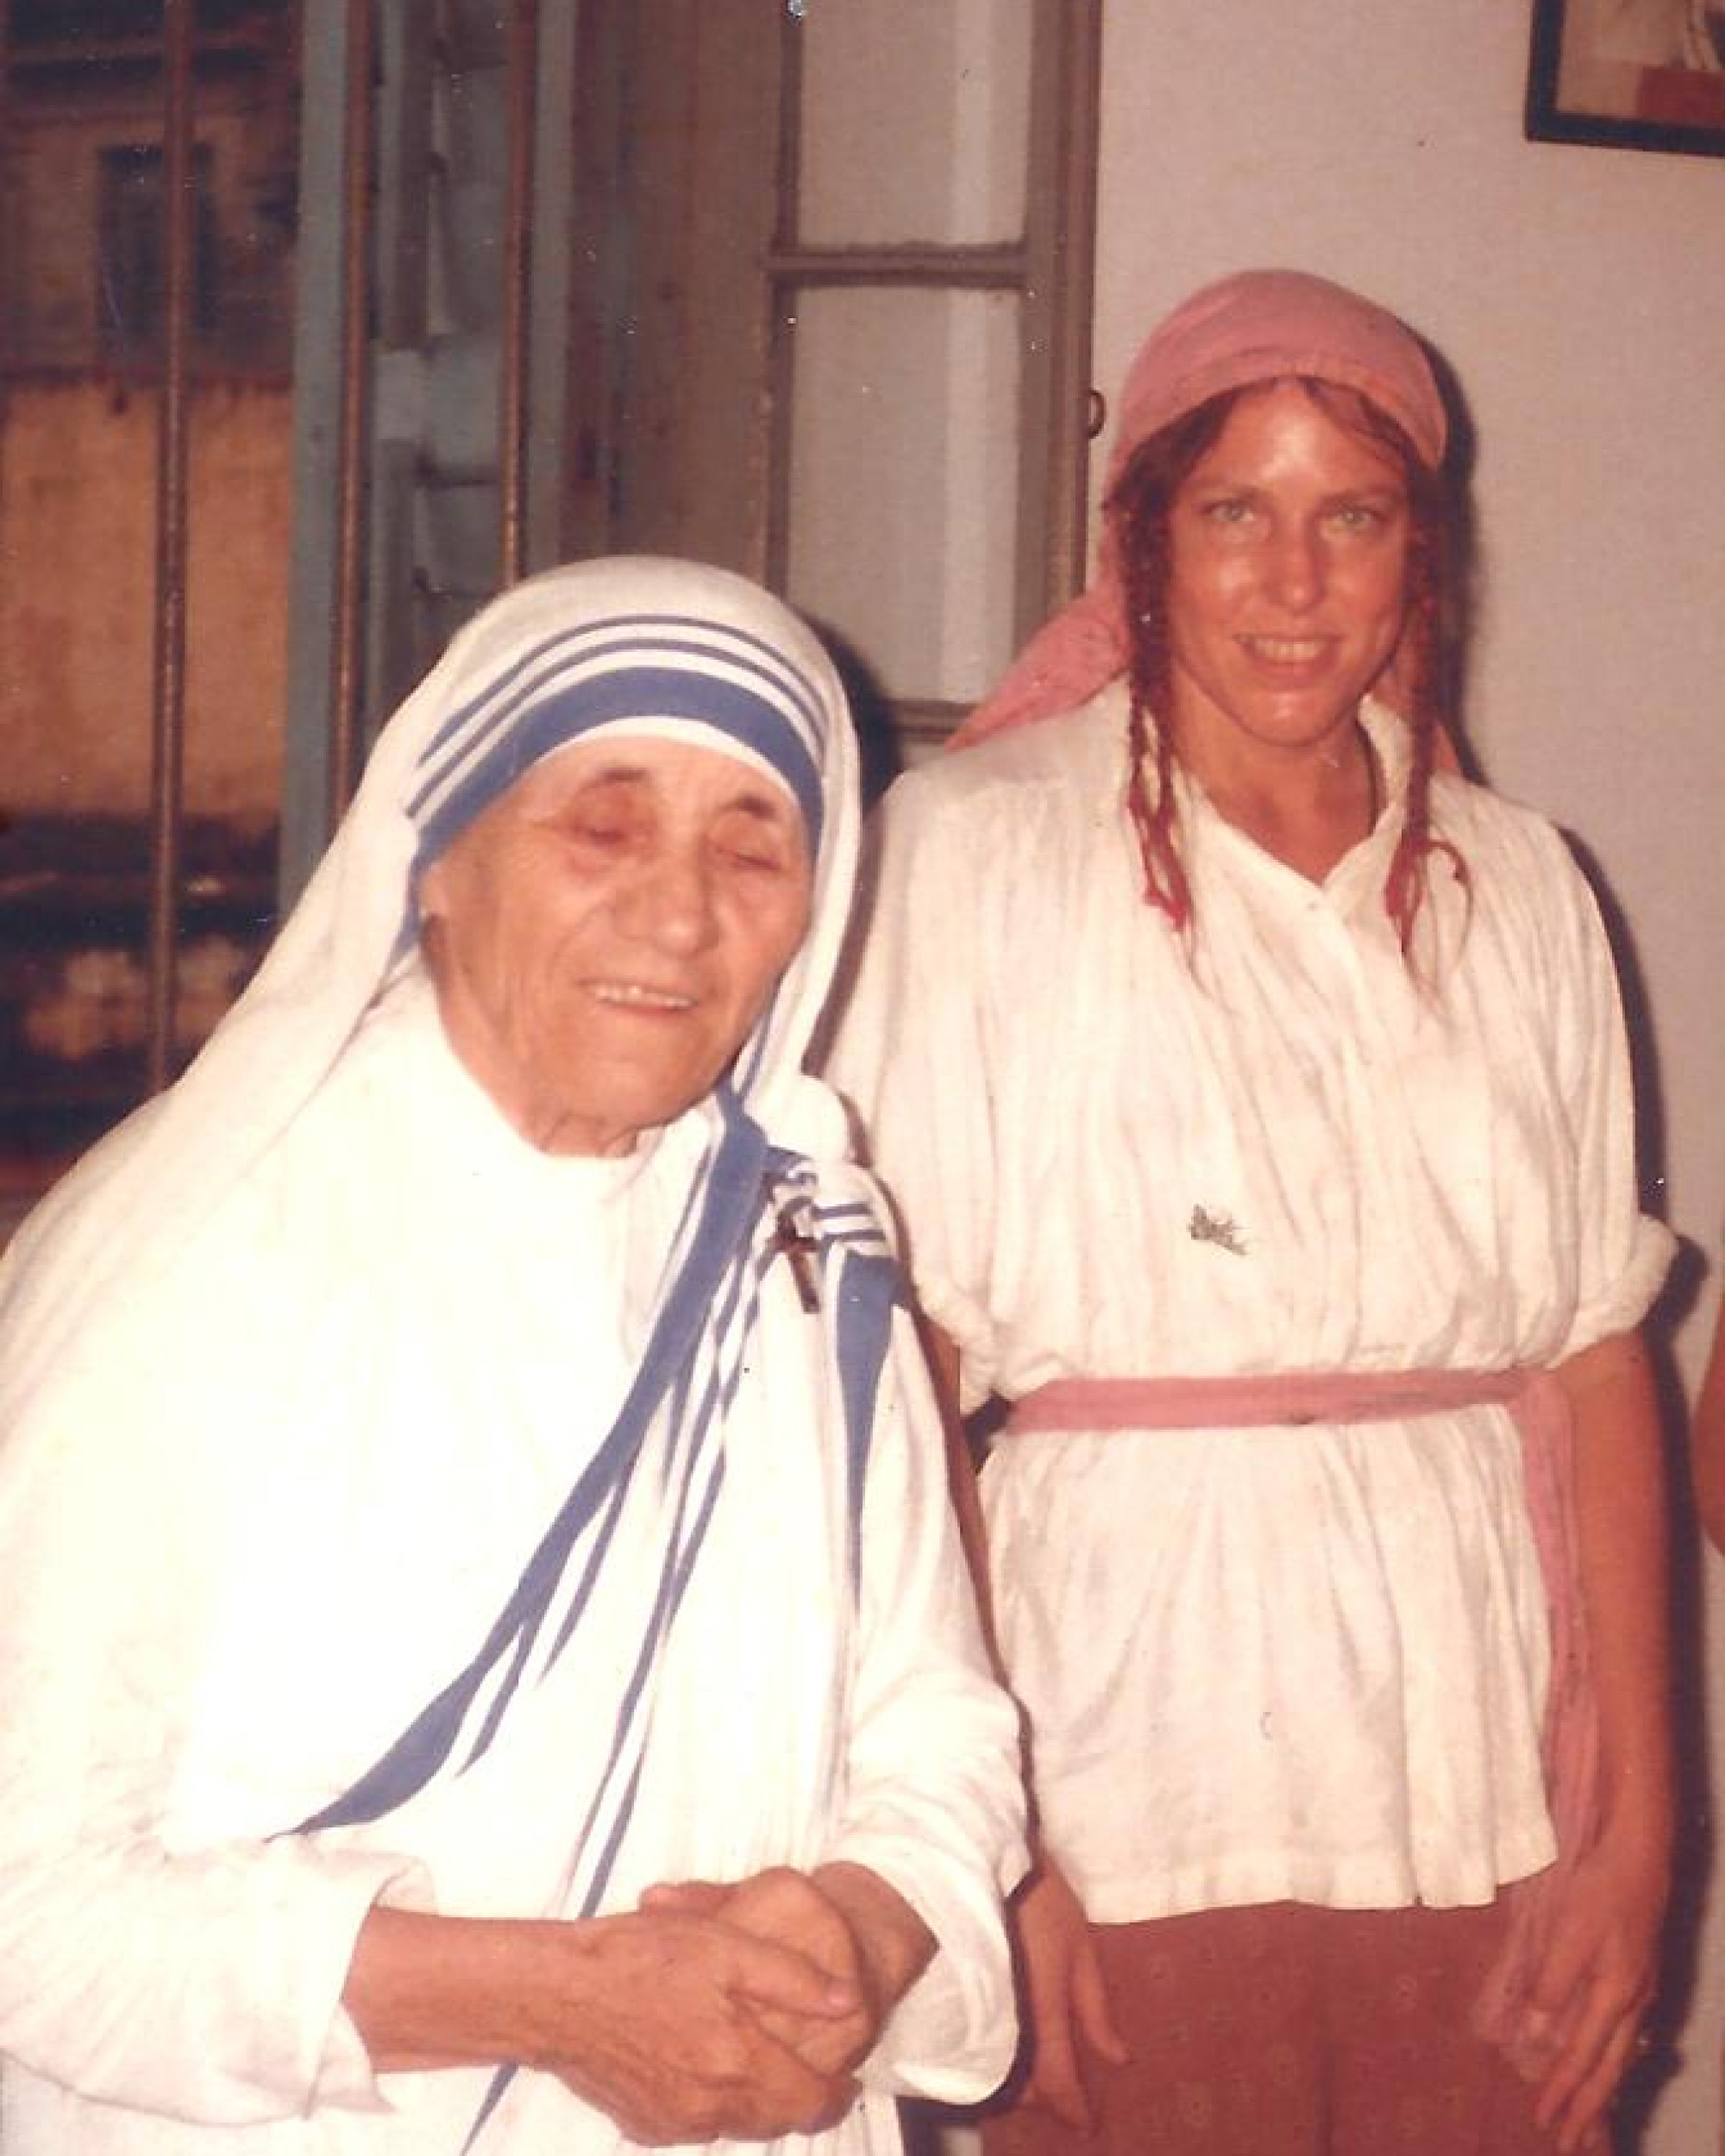 BB with Mother Teresa.  Image courtesy of BB St. Roman.